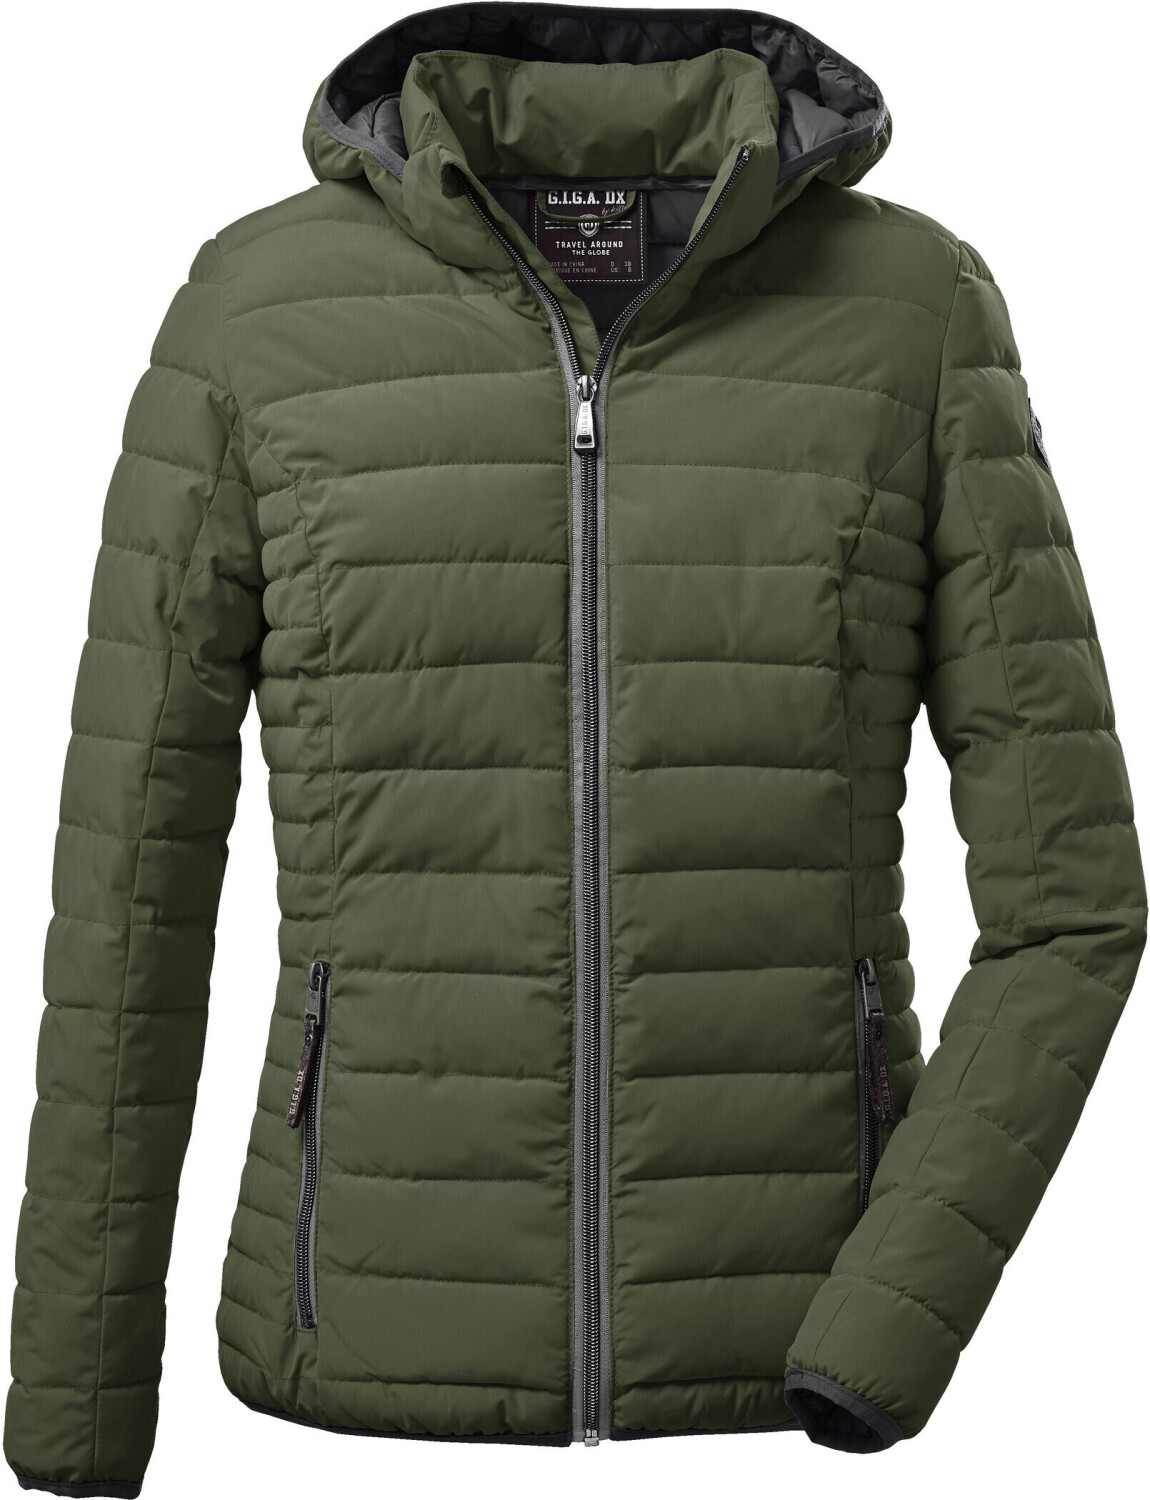 Jacket Buy (Today) Wmn Deals – Best Ventoso on £43.52 from Killtec Quilted D